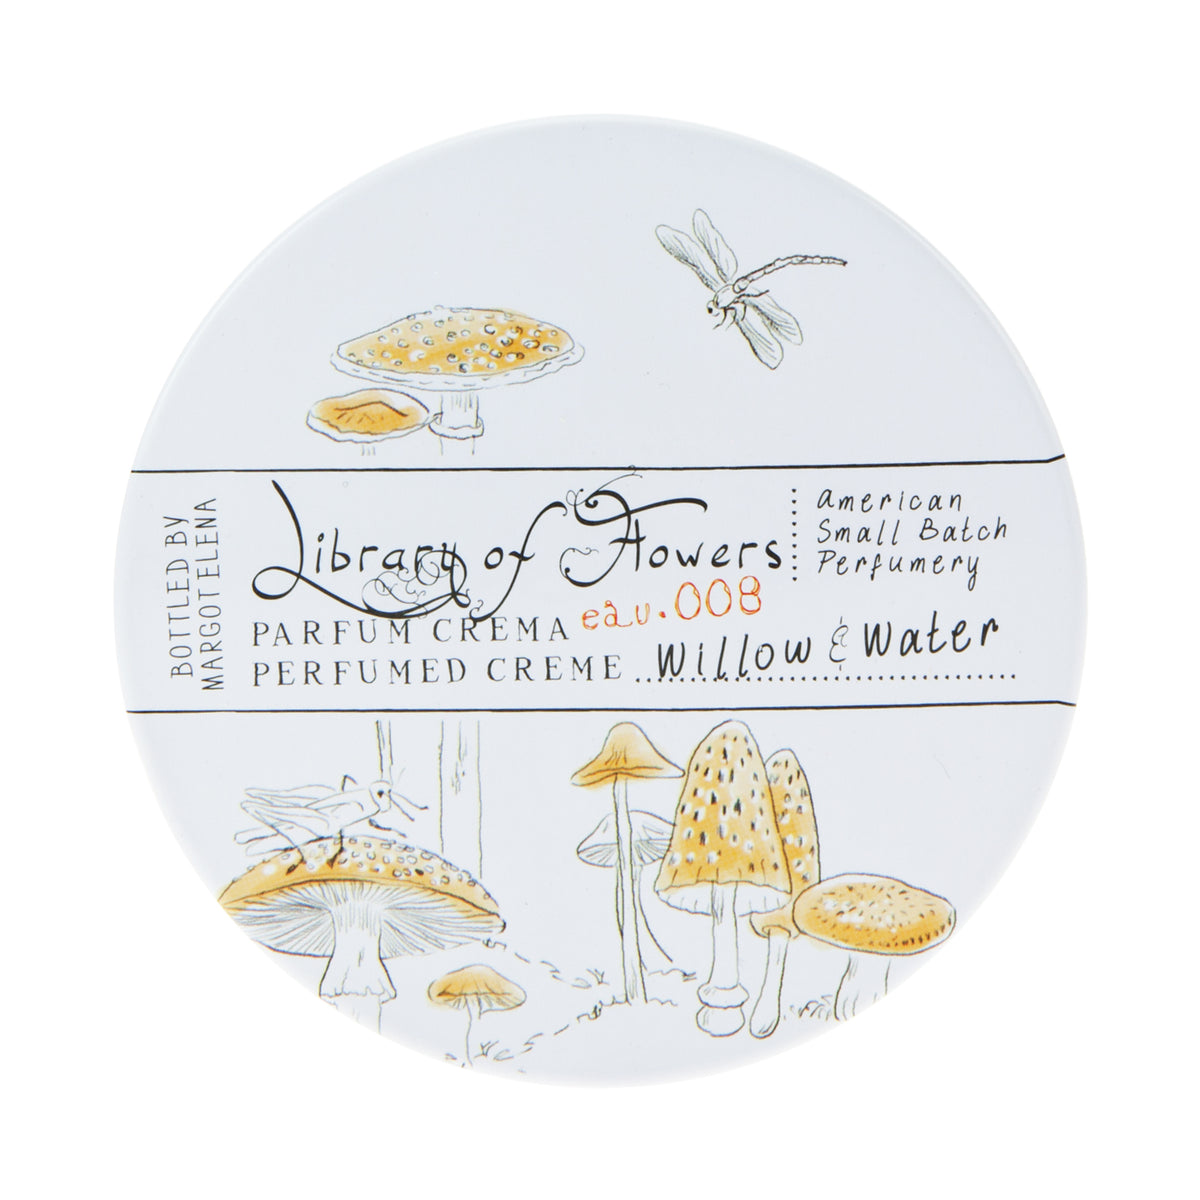 A round container of Library of Flowers Willow & Water Parfum Crema by Margot Elena featuring delicate sketches of mushrooms and a dragonfly on a white background.